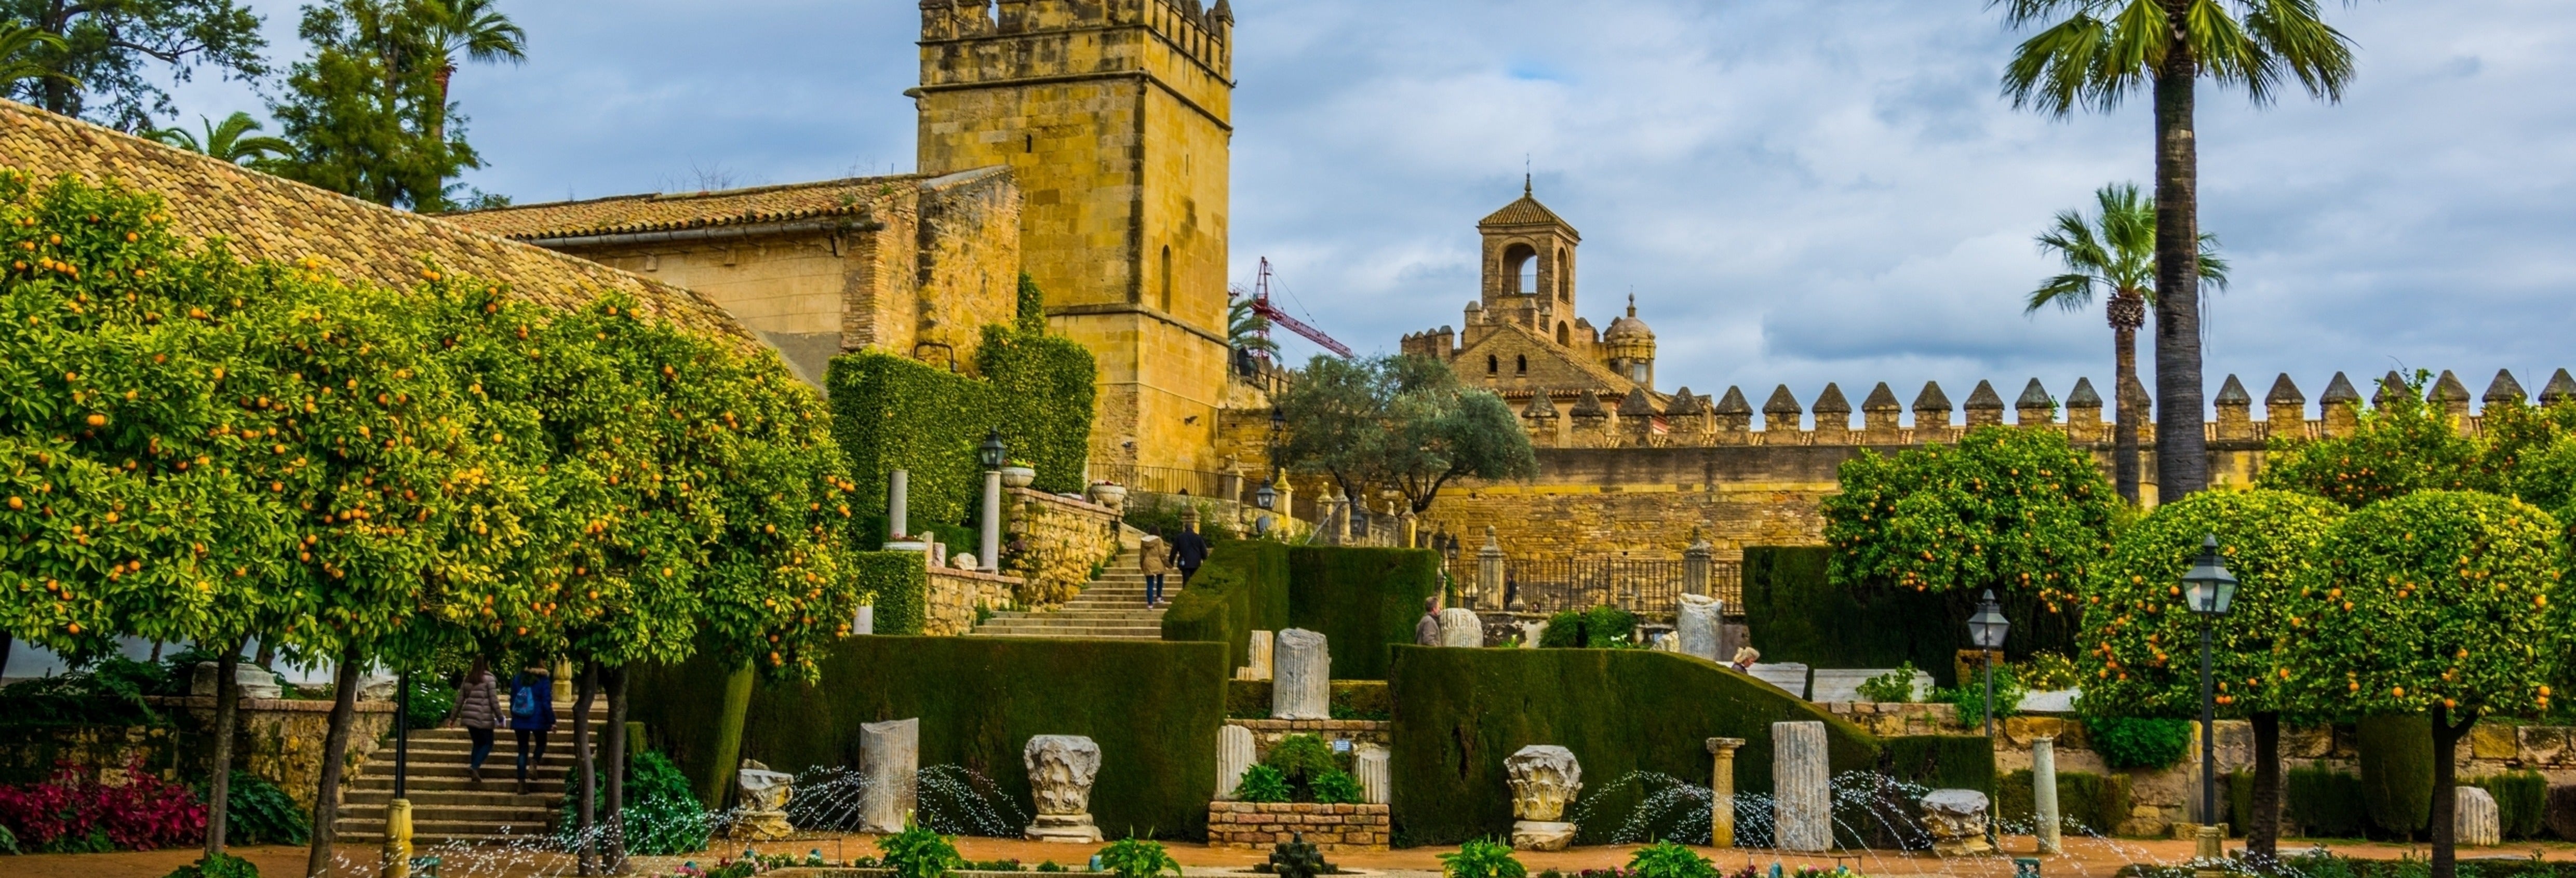 Complete Cordoba Tour with Tickets